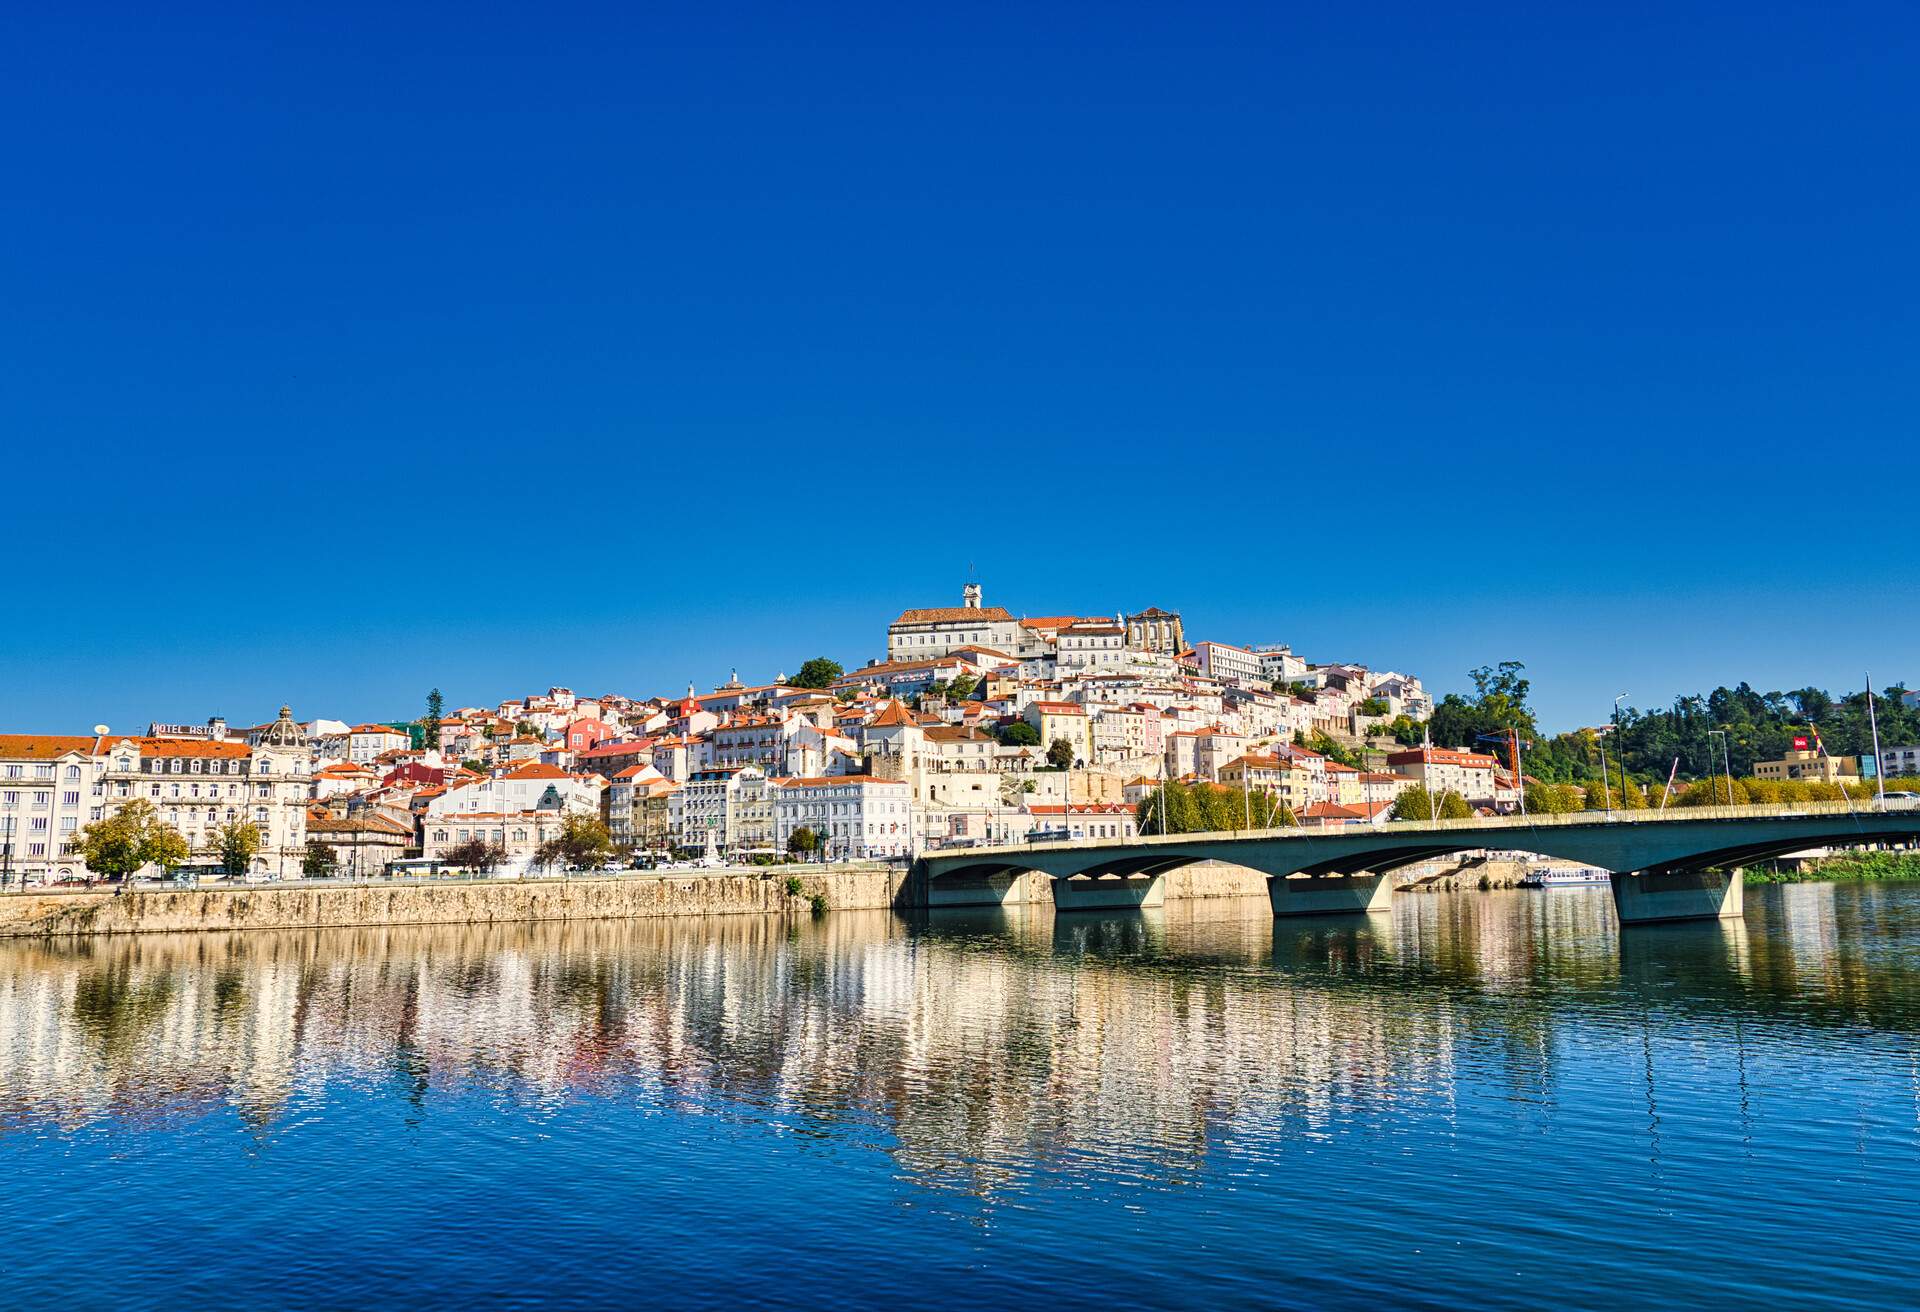 View of the historic center of Coimbra from the Mondego river. The university city of Coimbra is the capital of the Coimbra district and is located on the Rio Mondego, which flows into the Atlantic. Coimbra in October 2020.